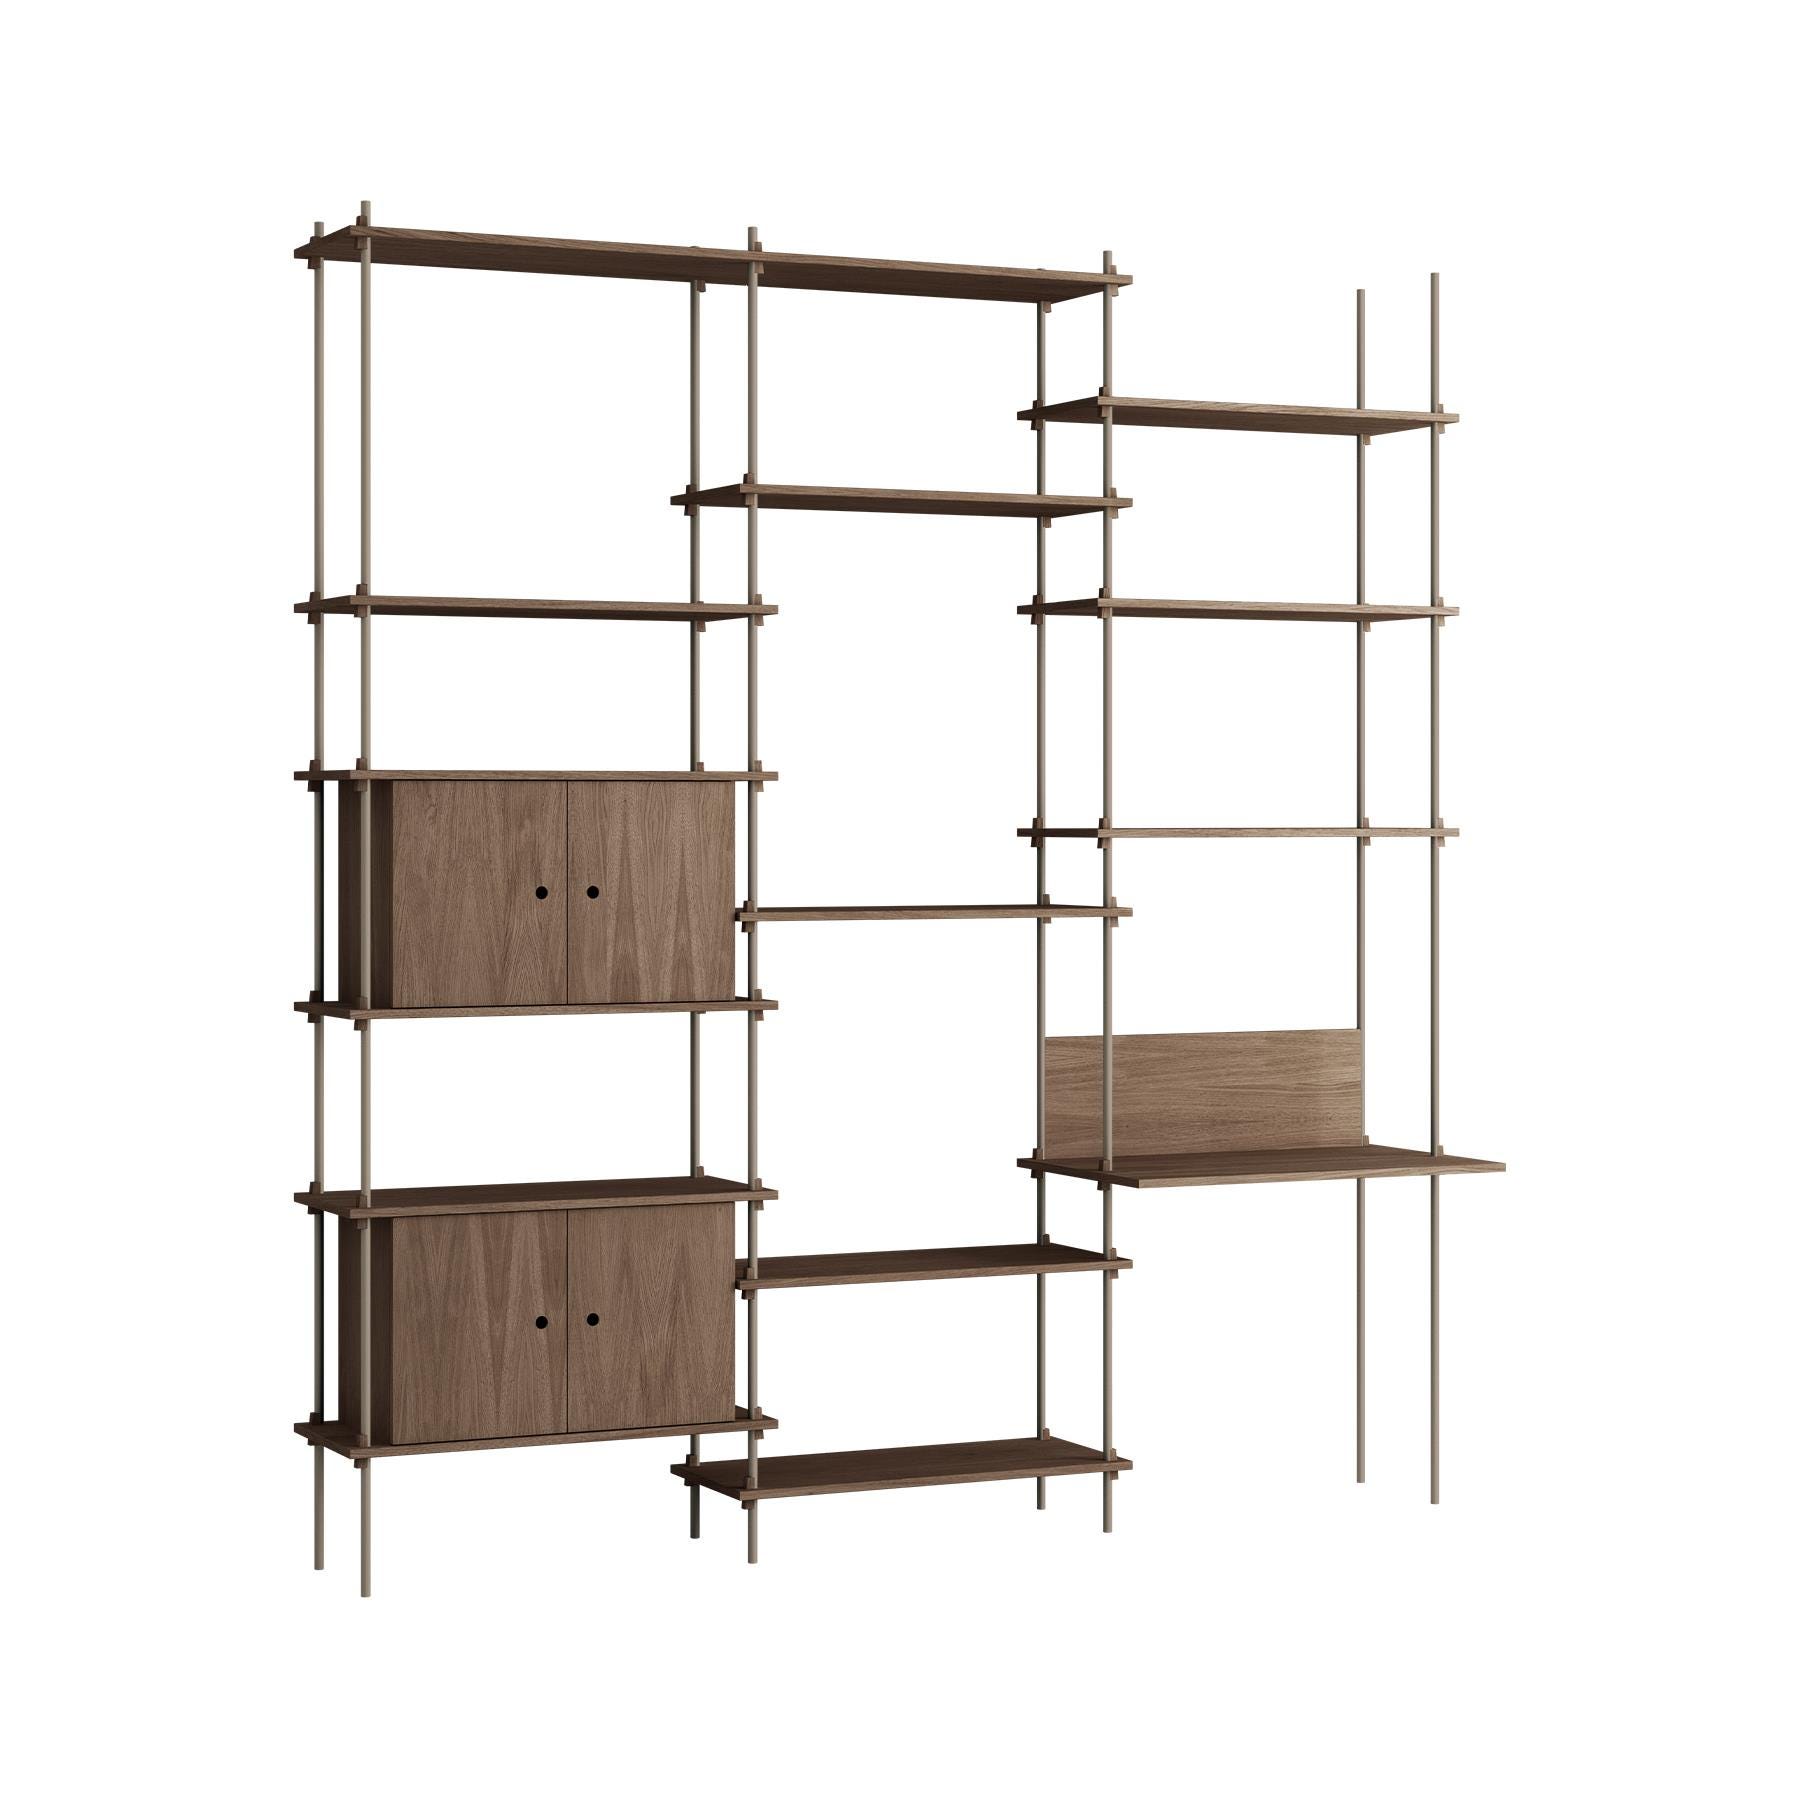 Moebe Triple Shelving System 2 Cabinets And Desk Smoked Oak Warm Grey Dark Wood Designer Furniture From Holloways Of Ludlow